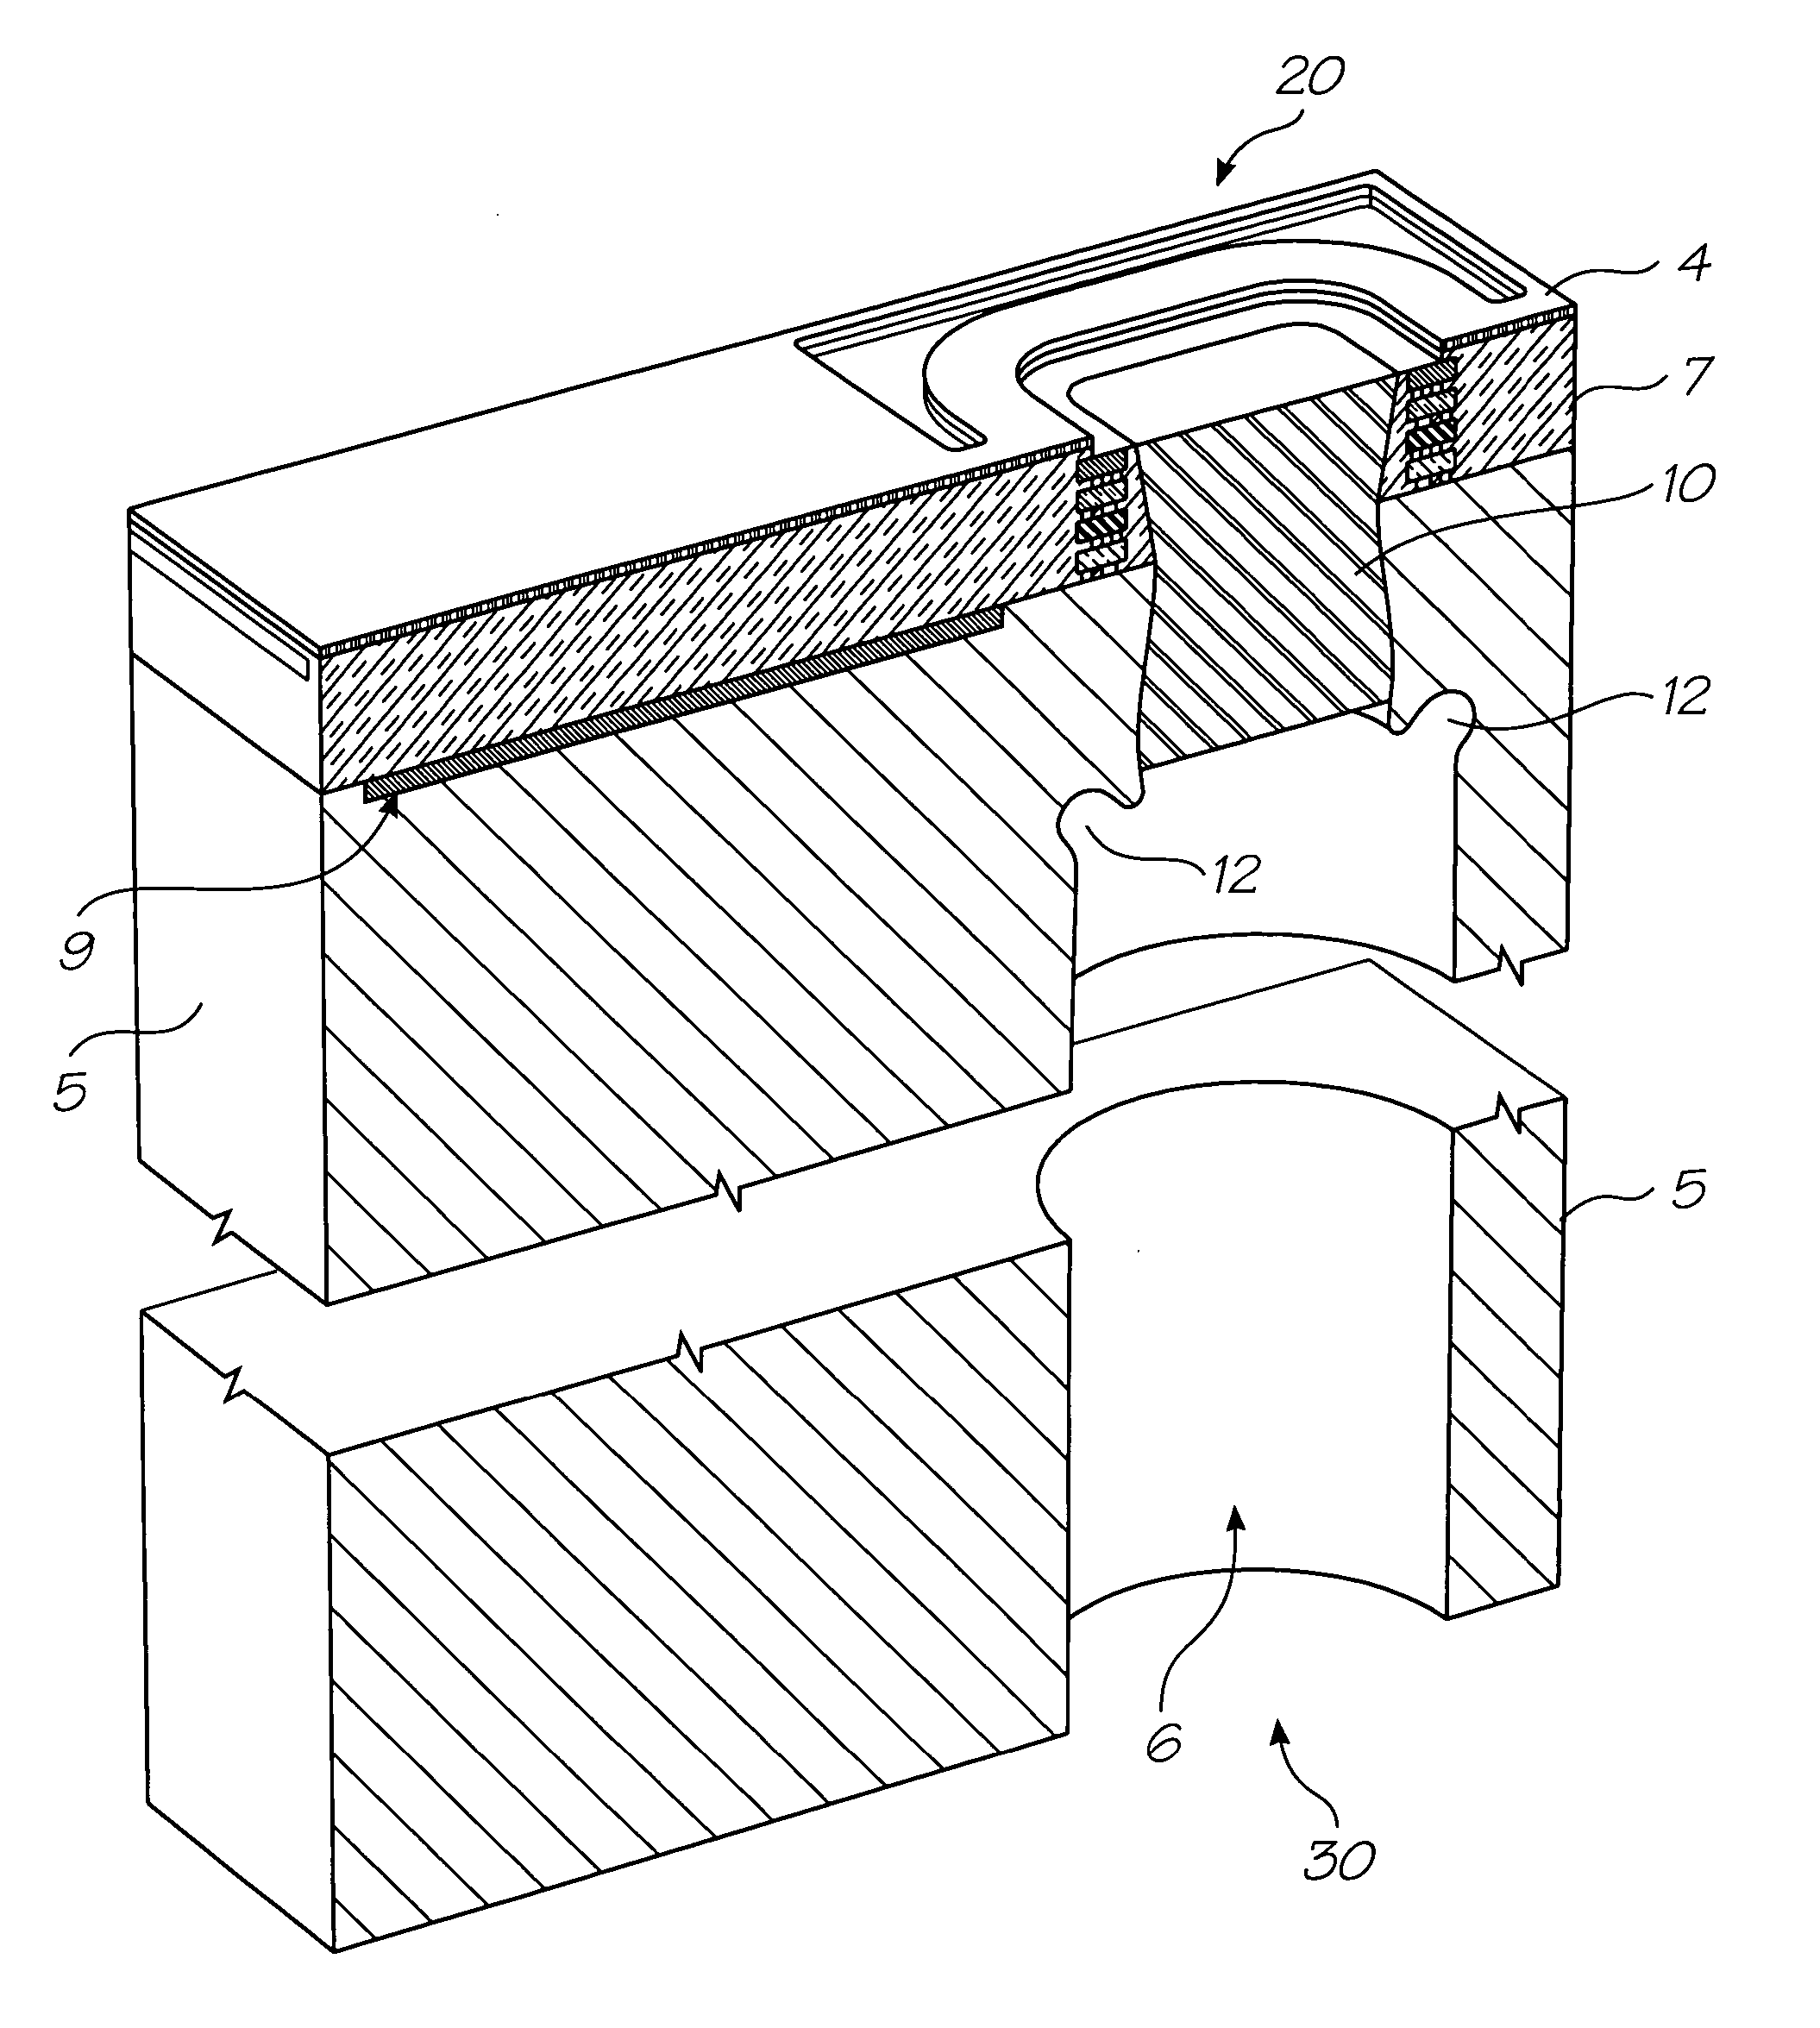 Method of modifying an etched trench